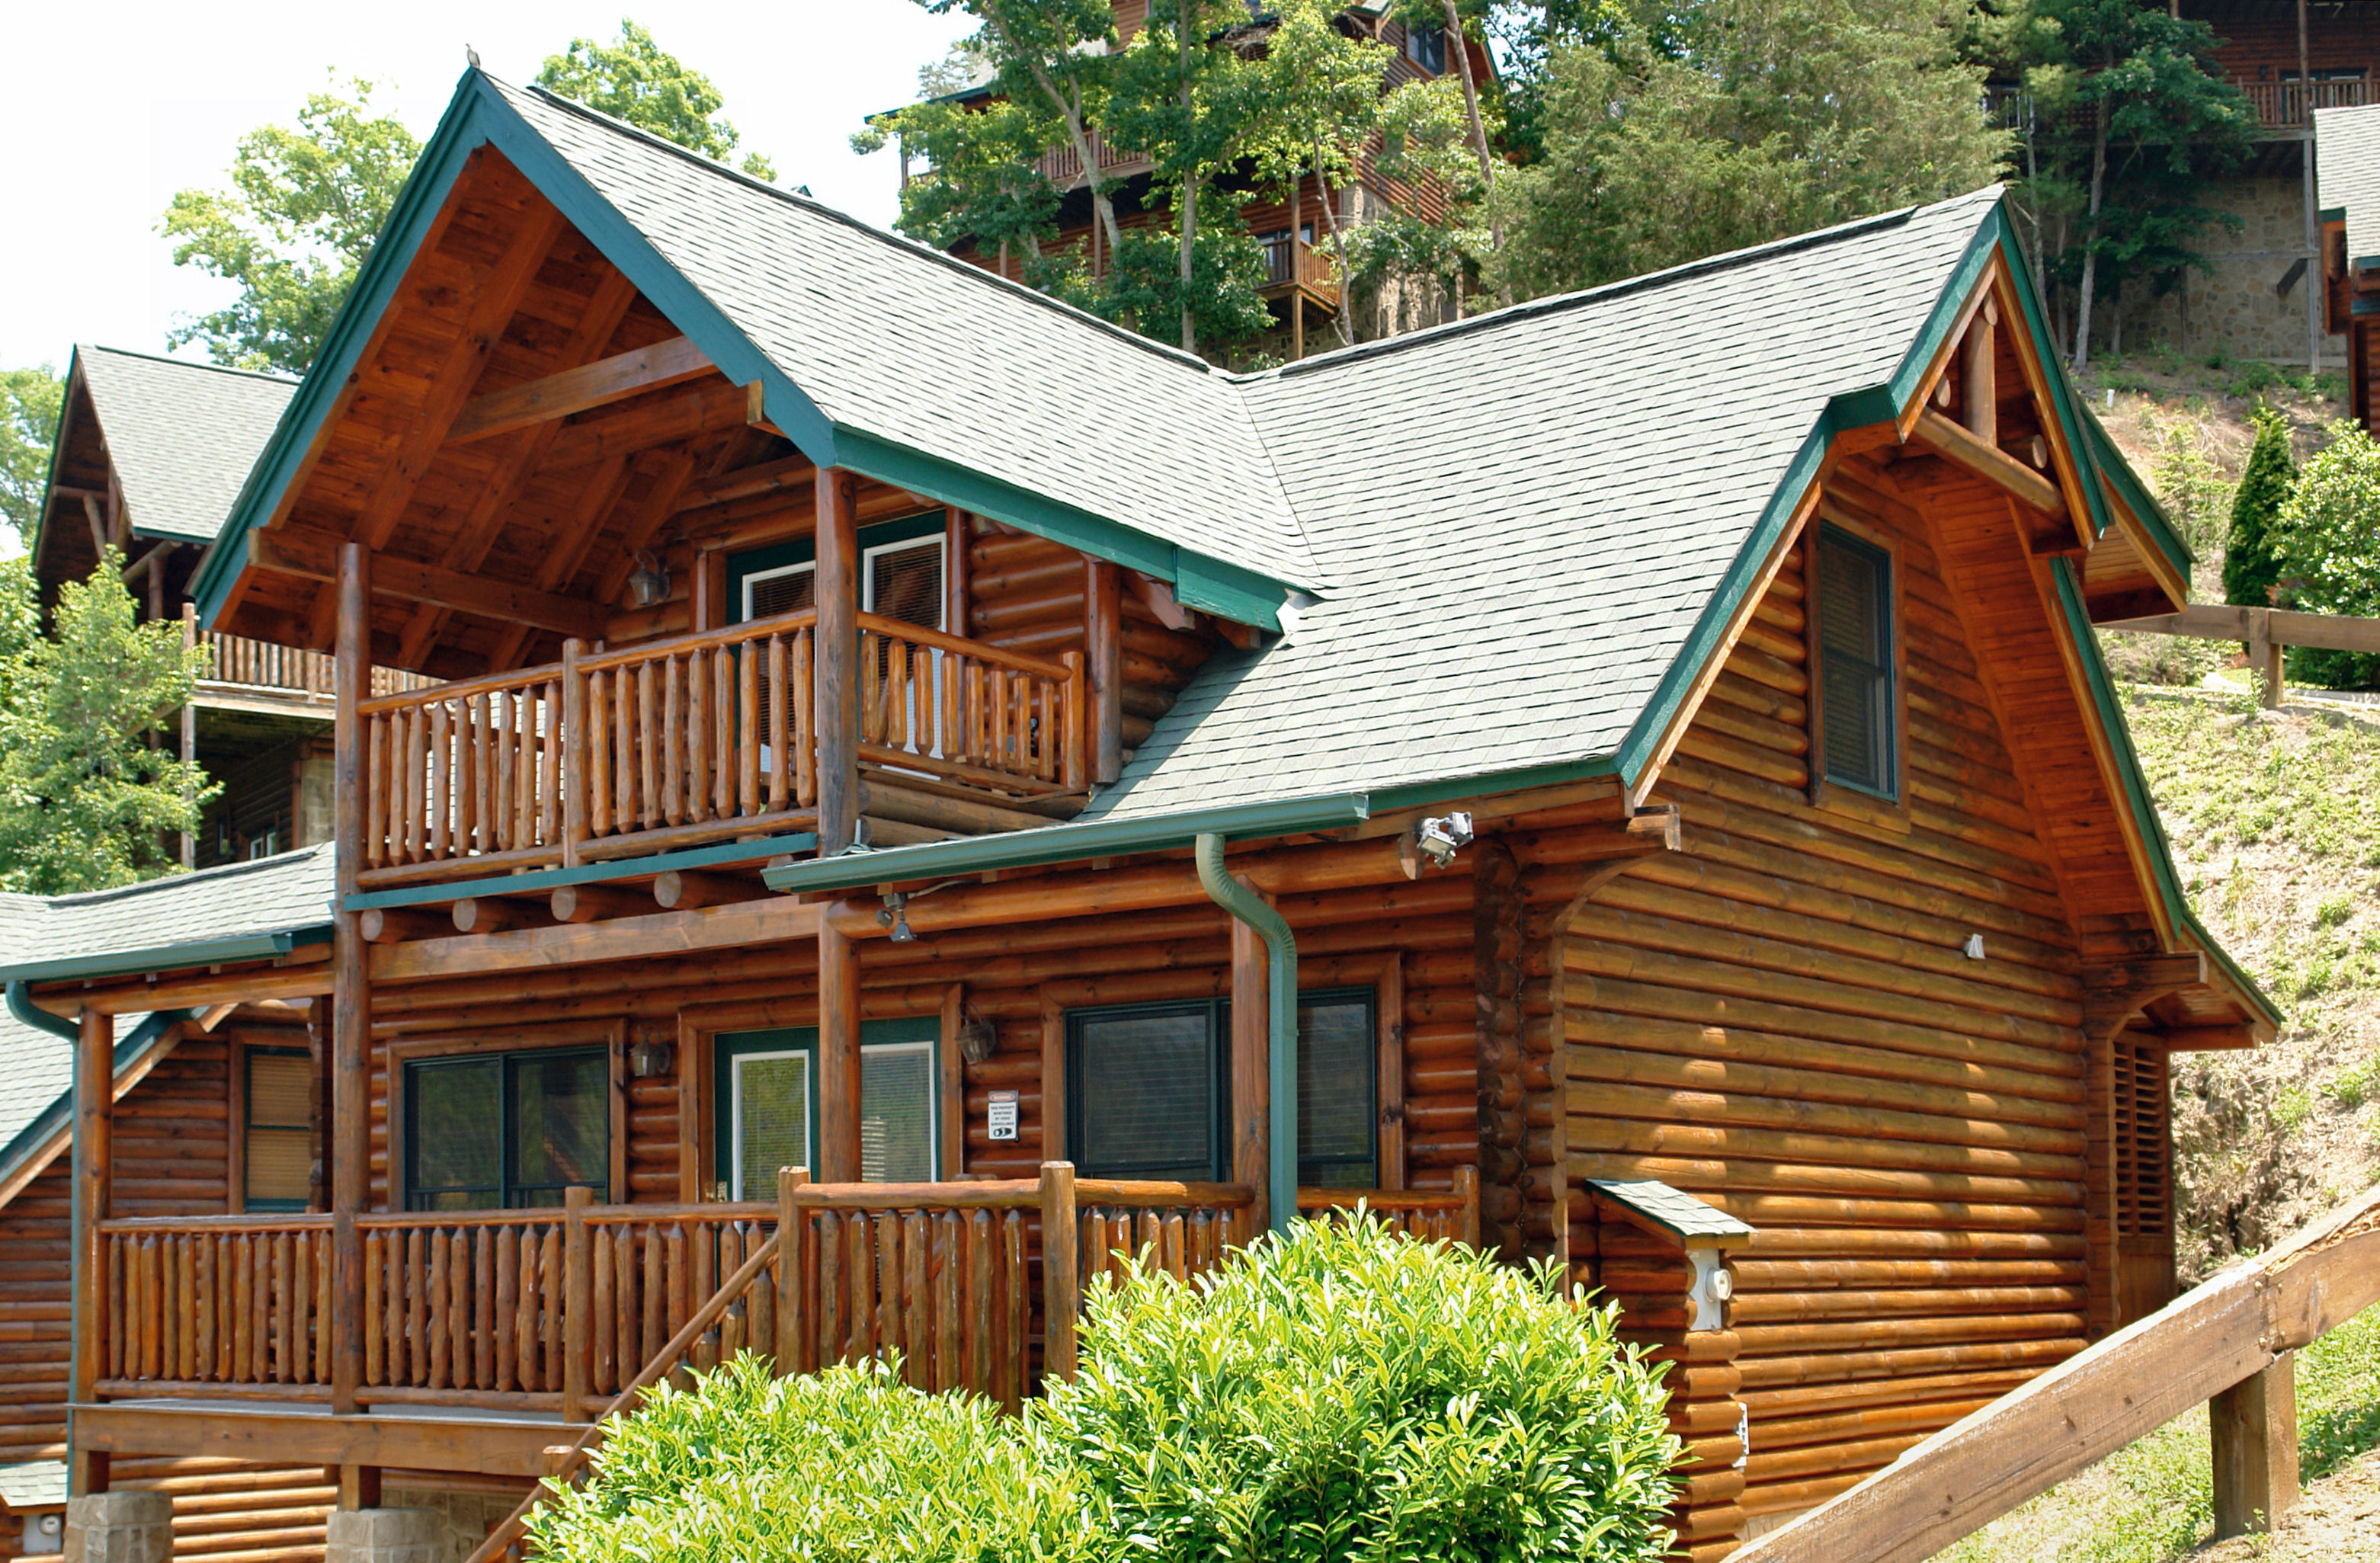 Home Â» Search results for "Aunt Bugs Cabins Pigeon Forge Cabins ...